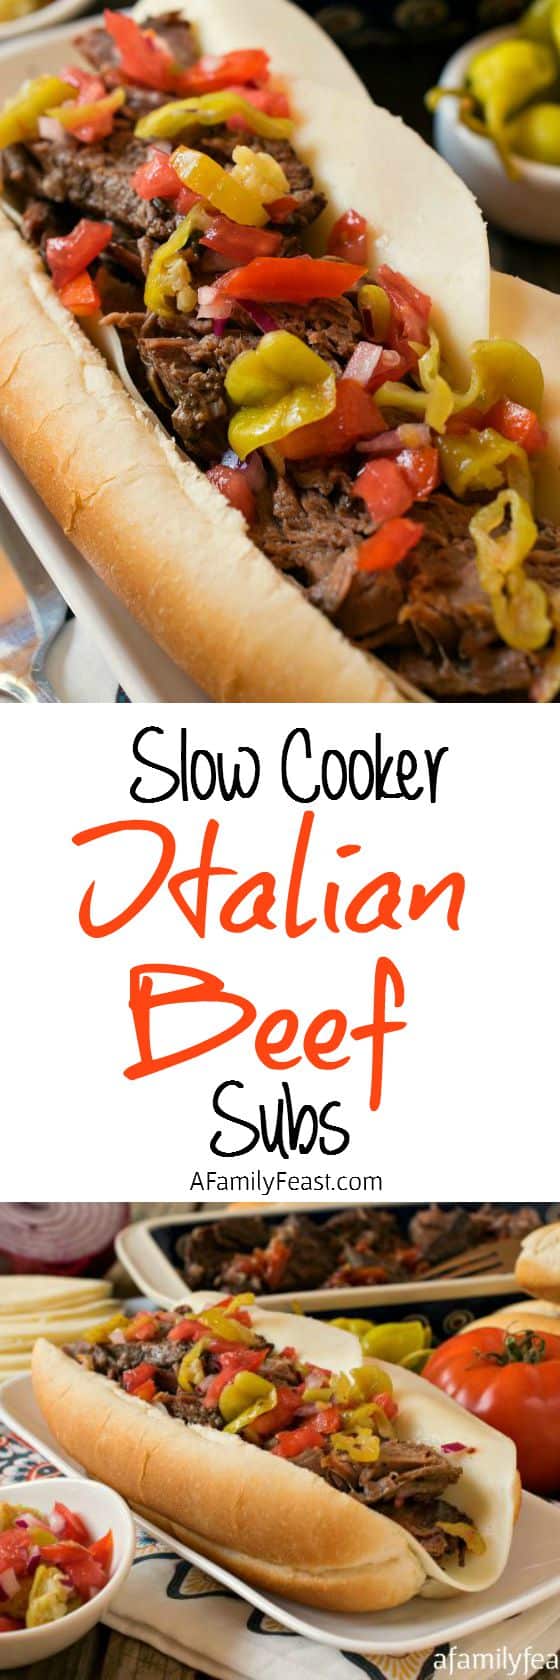 Slow Cooker Italian Beef Subs - Perfect for game day parties or a busy weeknight dinner - this Italian Beef is fantastic!